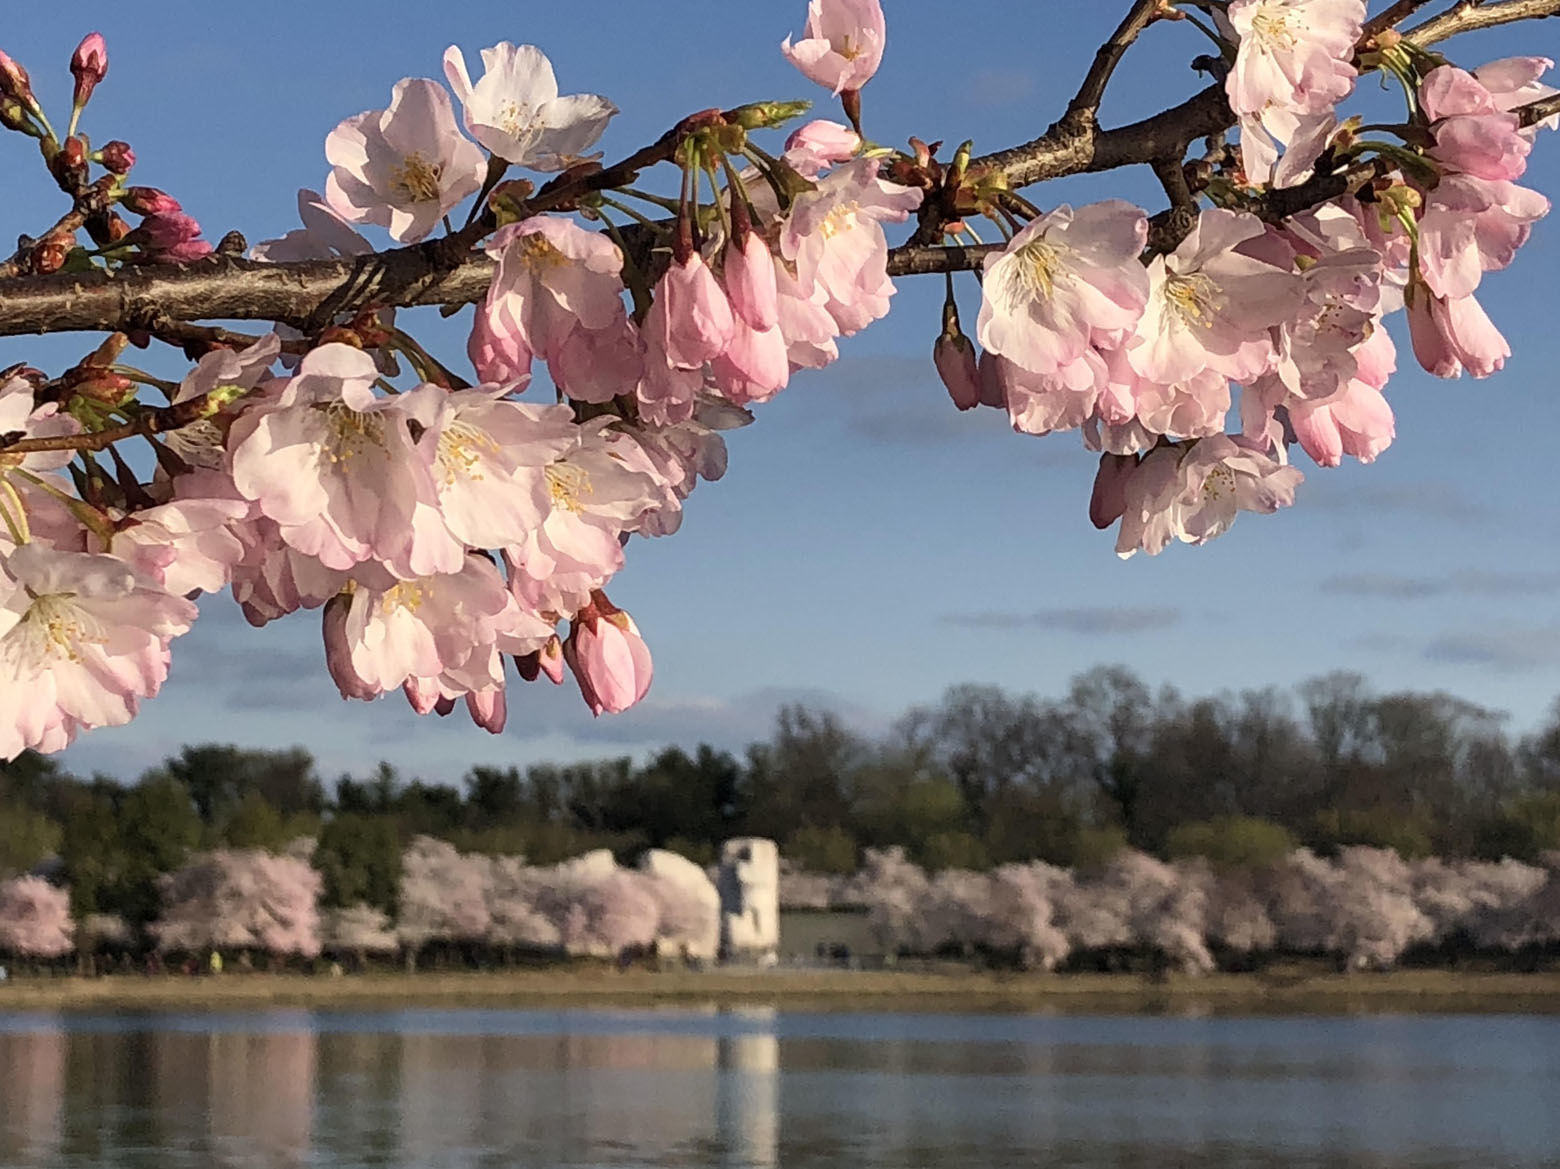 The cherry blossoms that line the Tidal Basin in D.C. reached peak bloom April 5, 2018 the National Park Service announced. (Courtesy National Park Service)